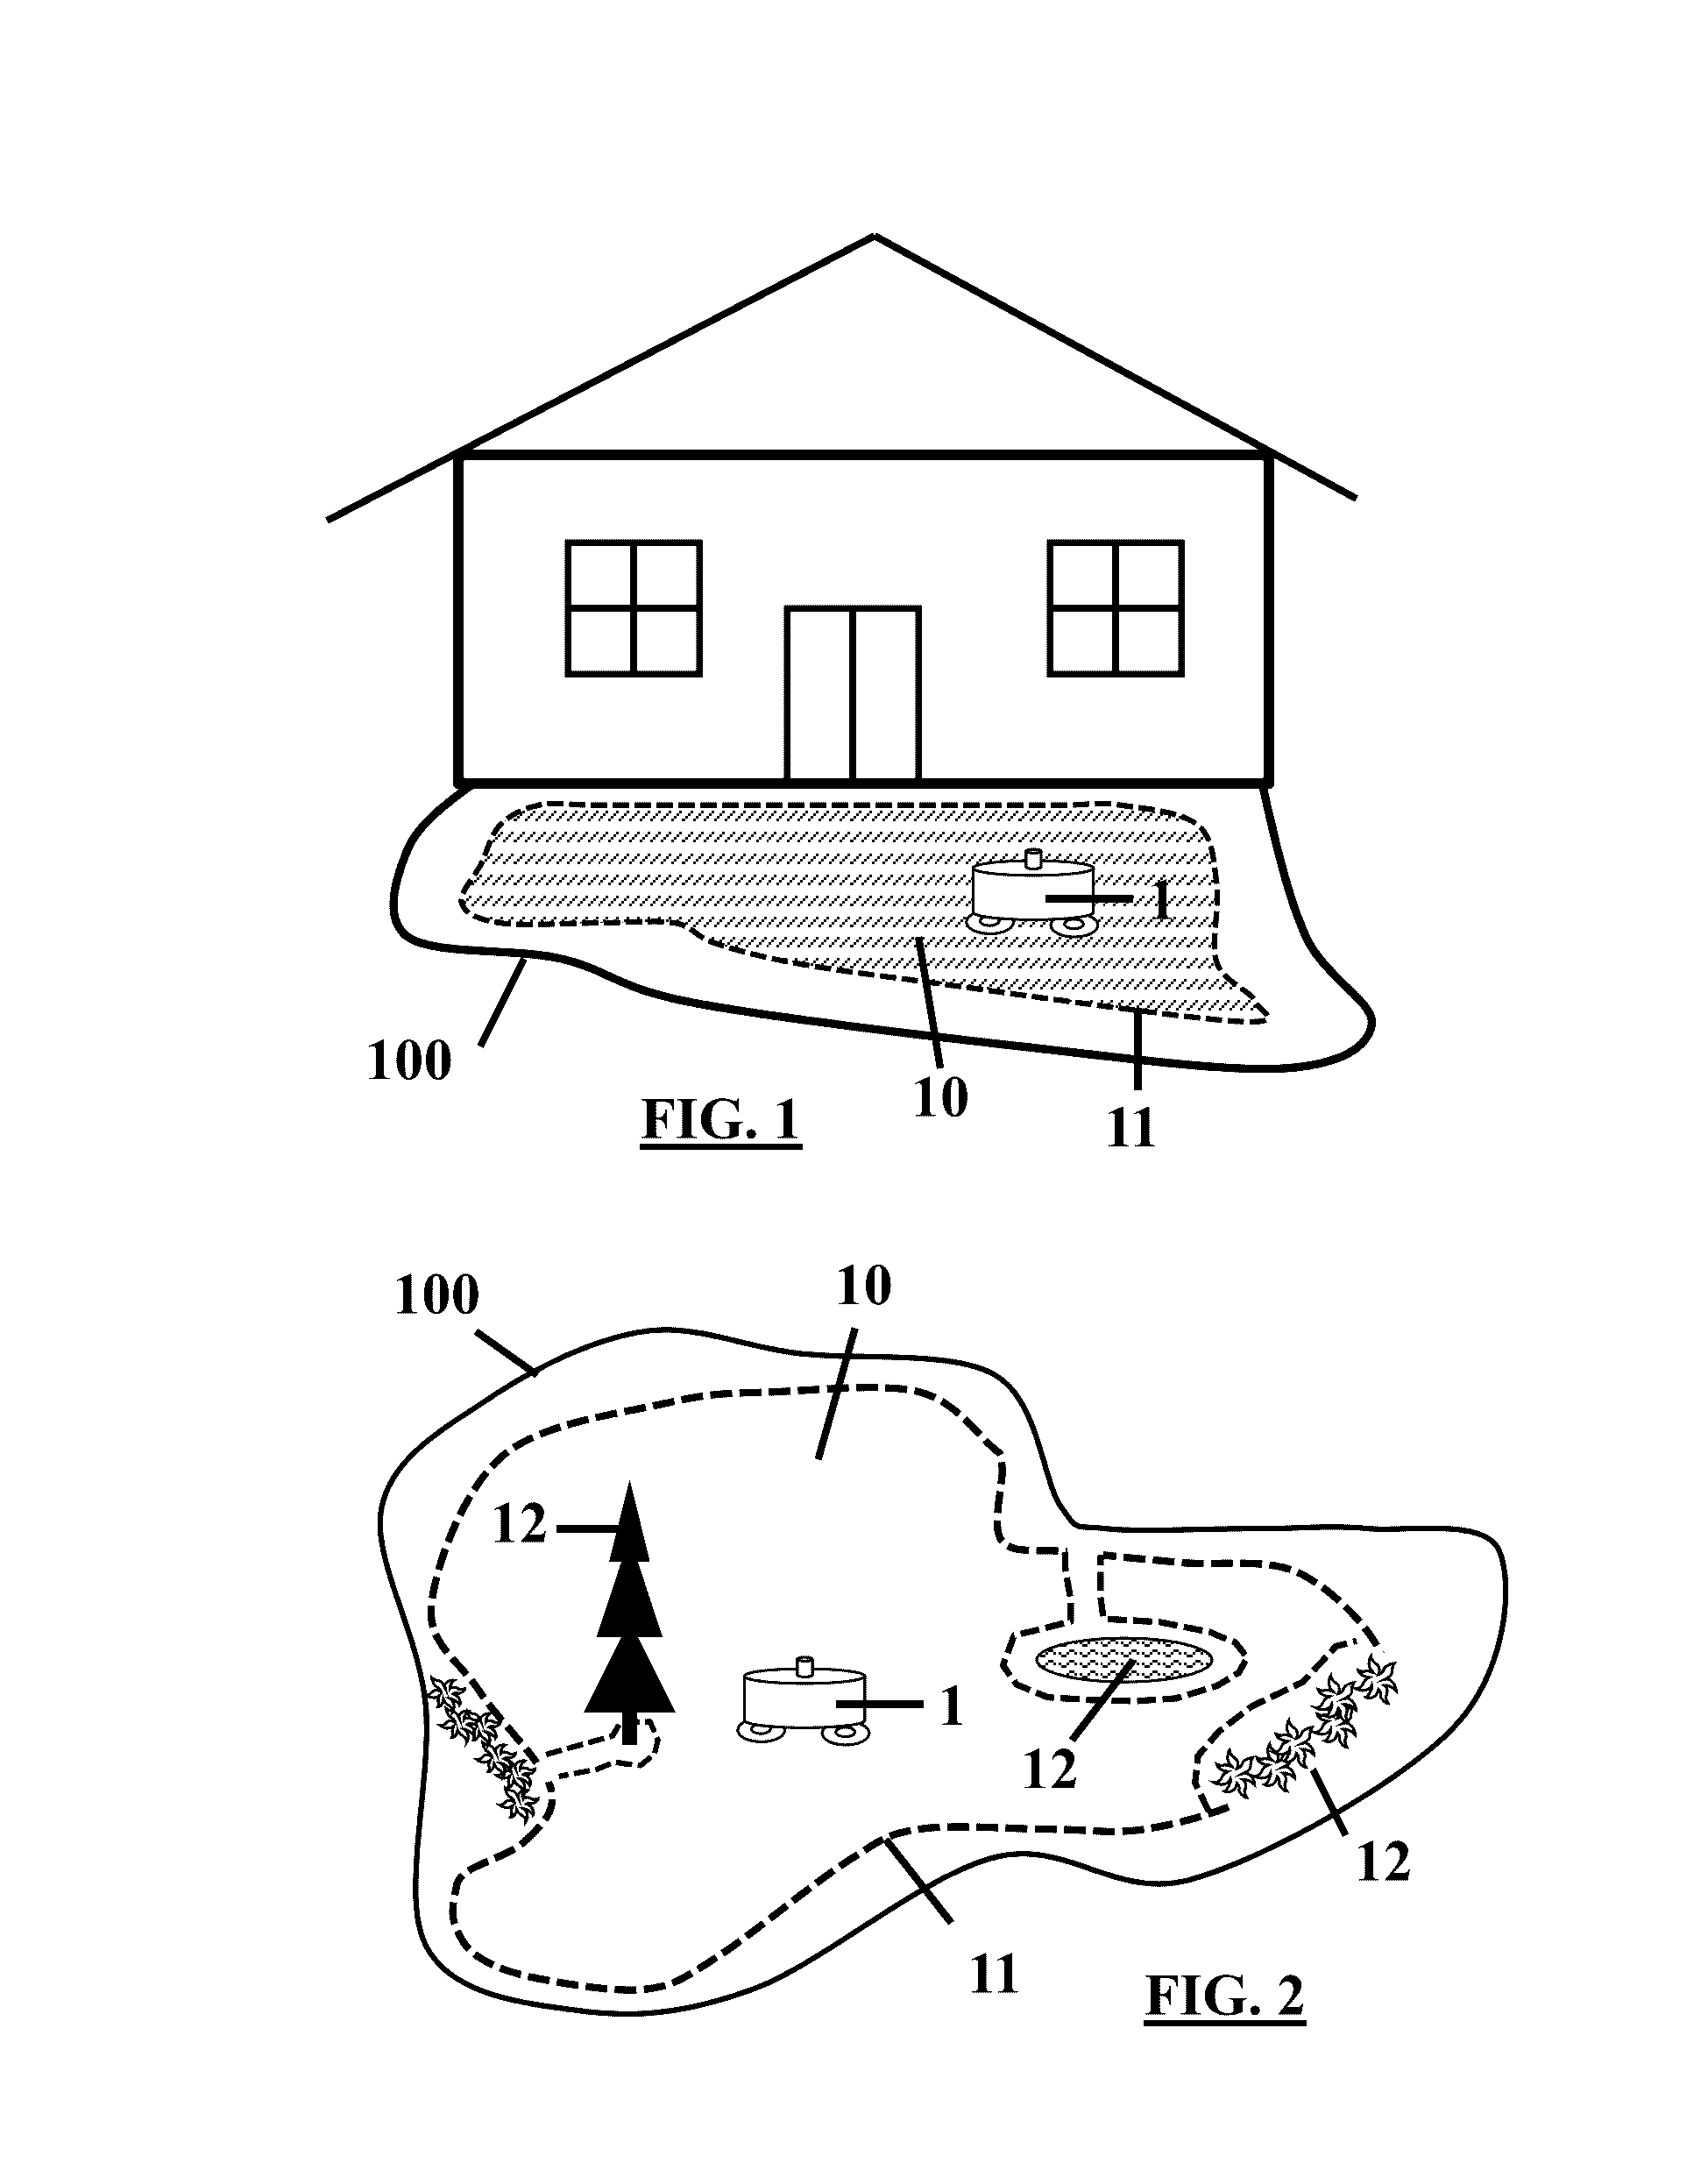 Robotic lawn mower with boundary stands